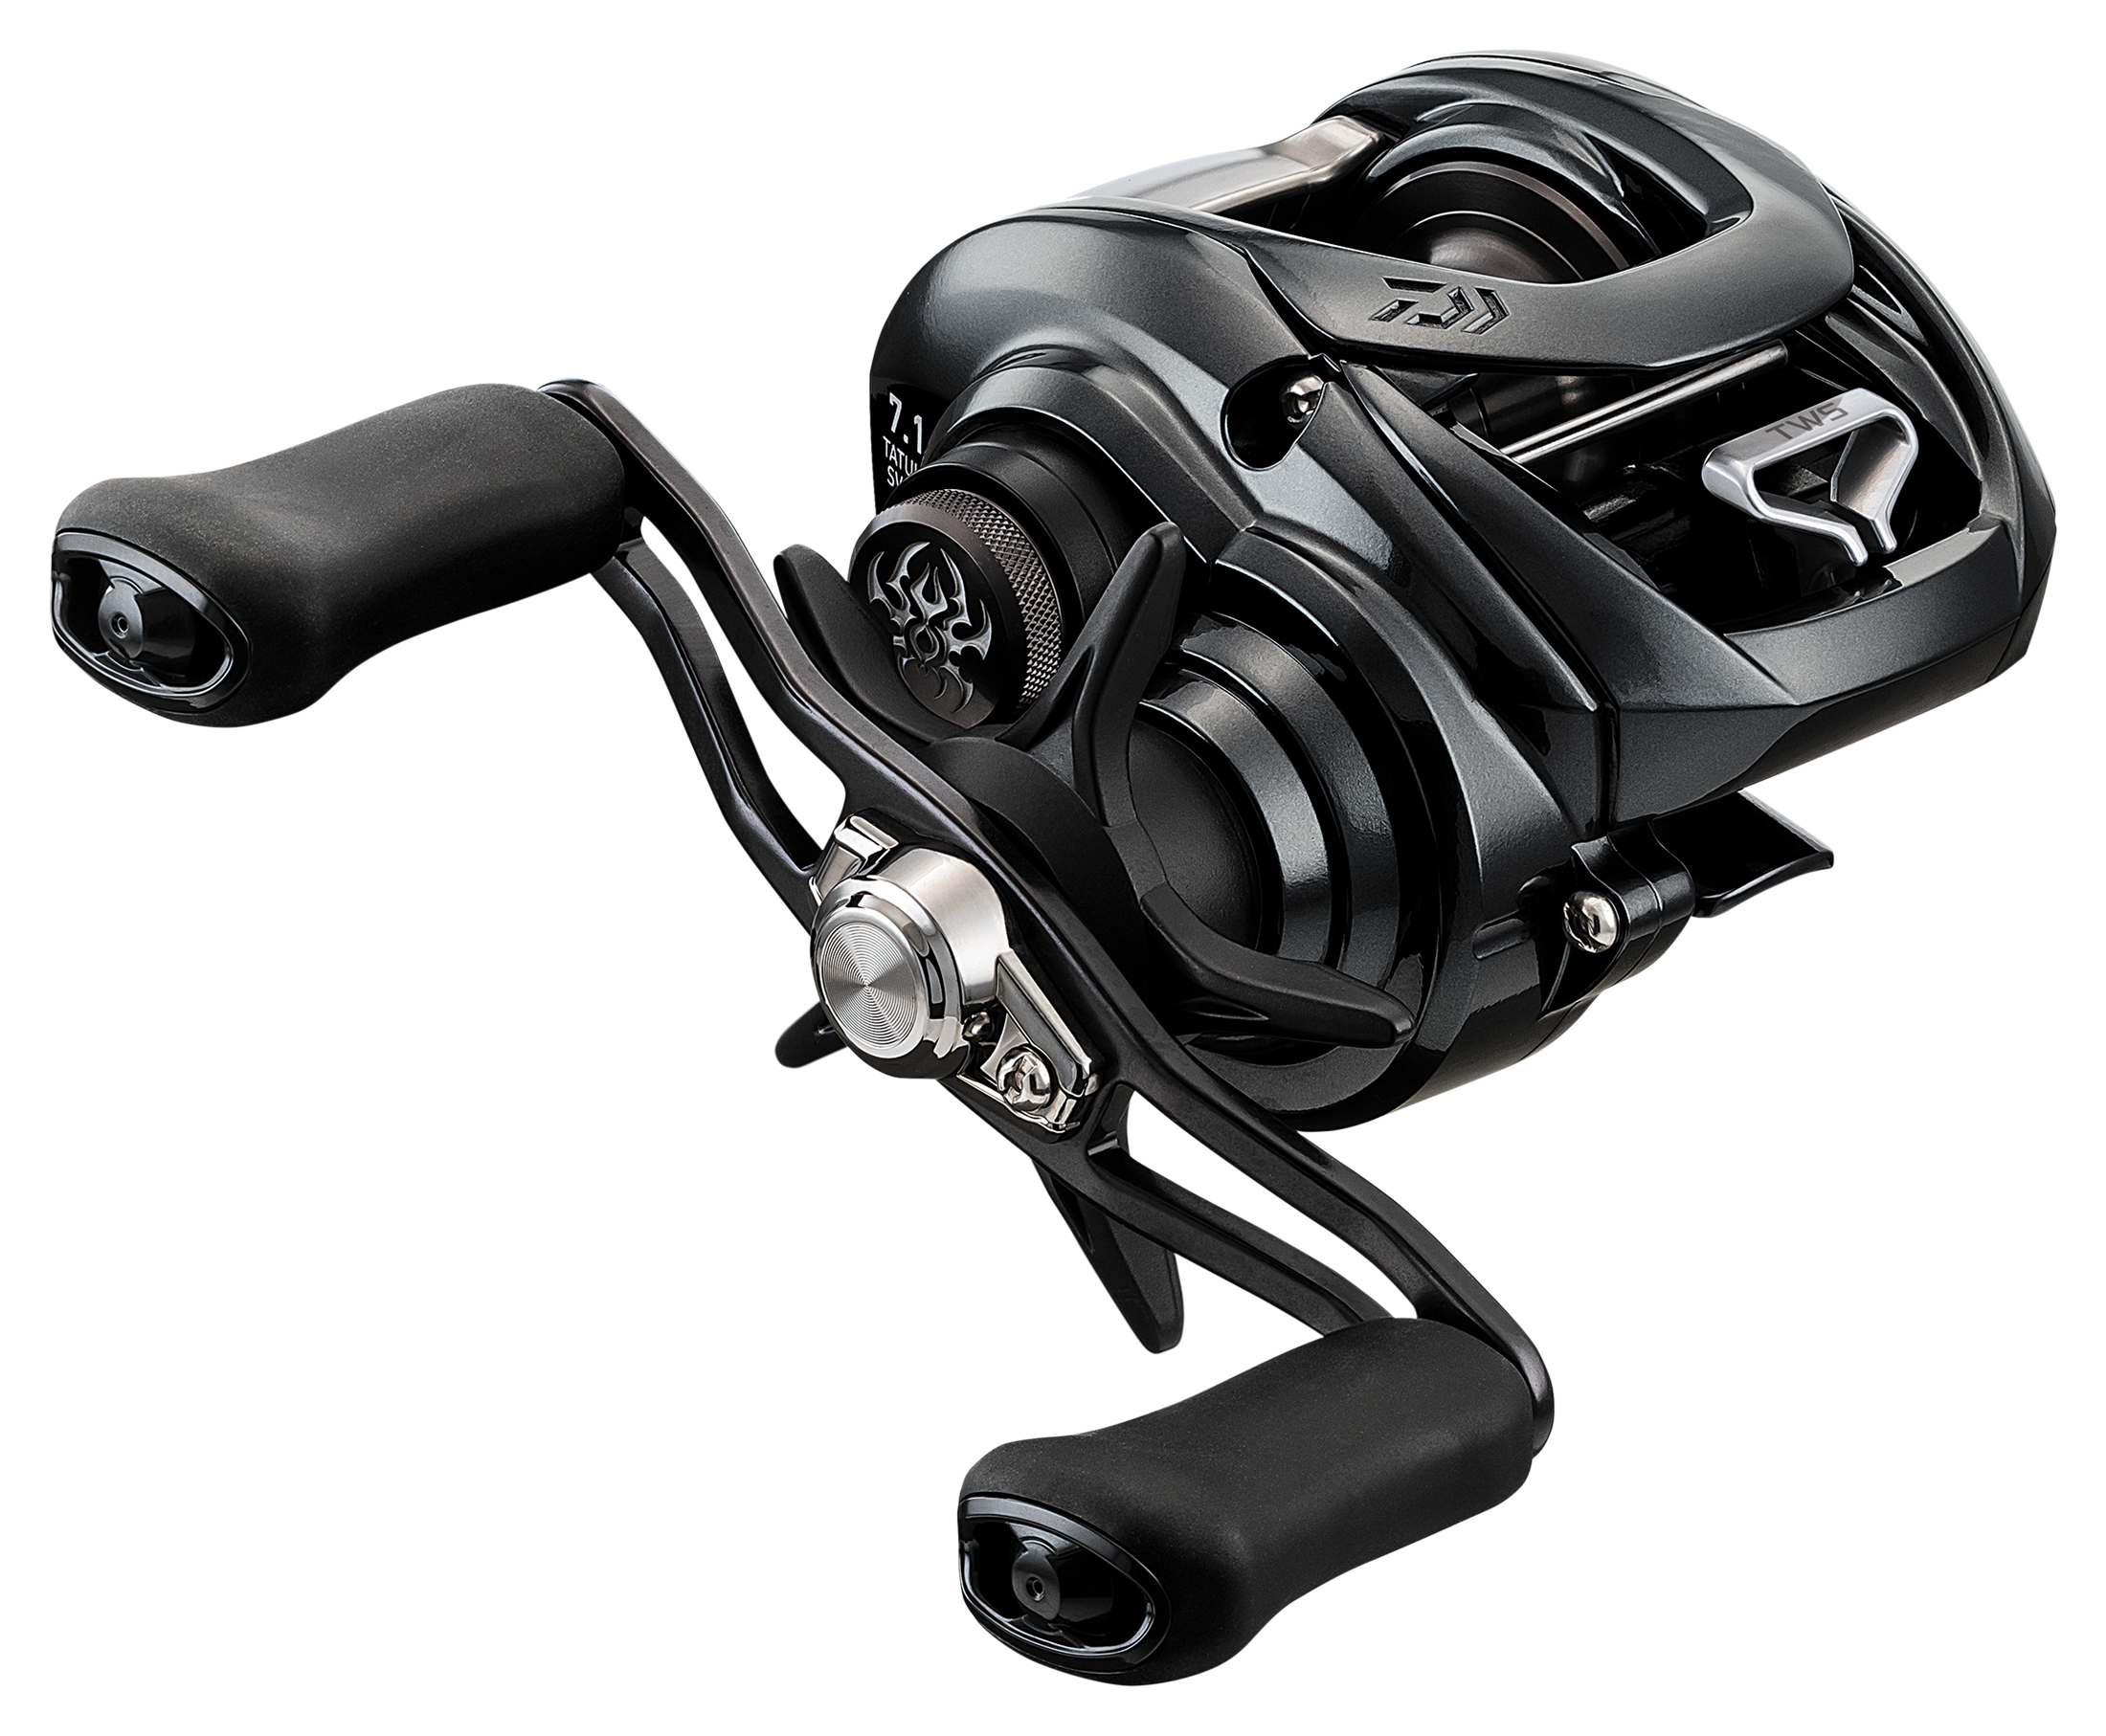 Fishing Reels For Sale - Find & Comapre From 1000 Products